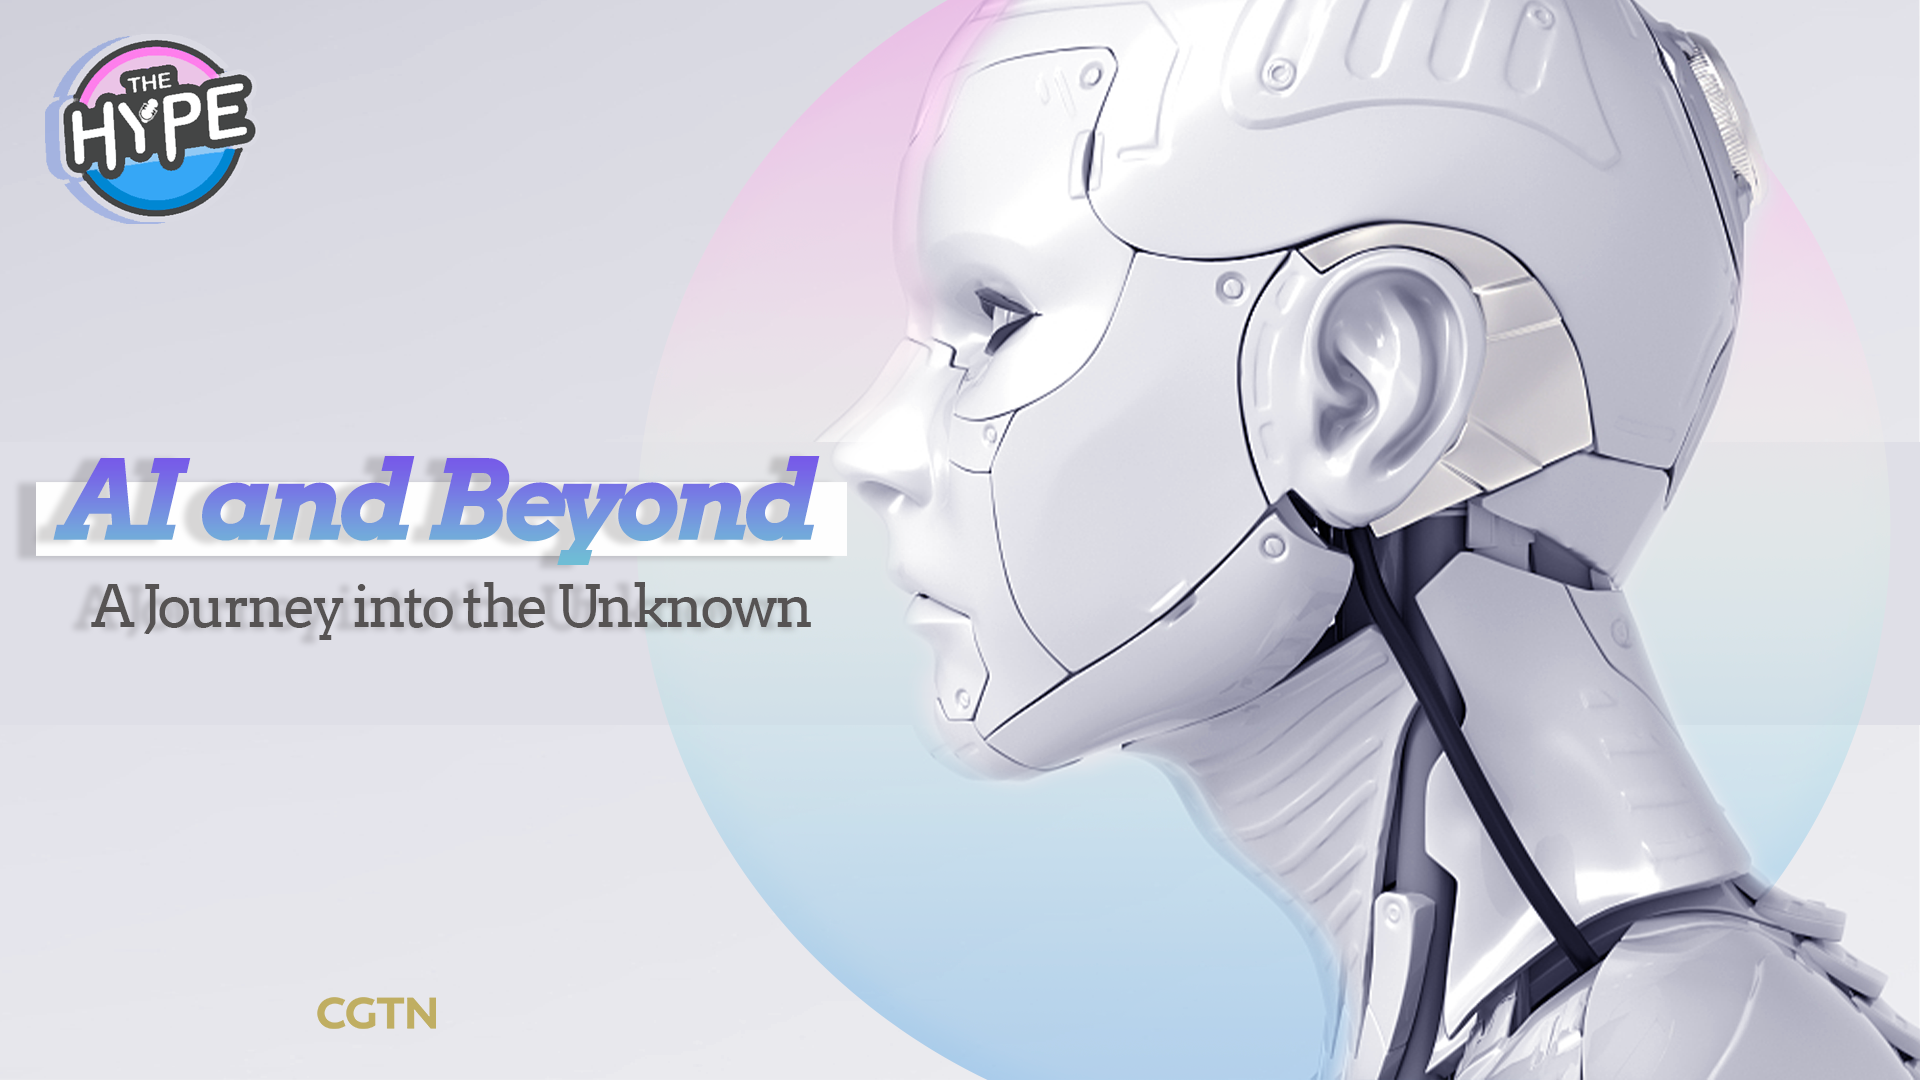 Live: THE HYPE – AI and beyond – A journey into the unknown